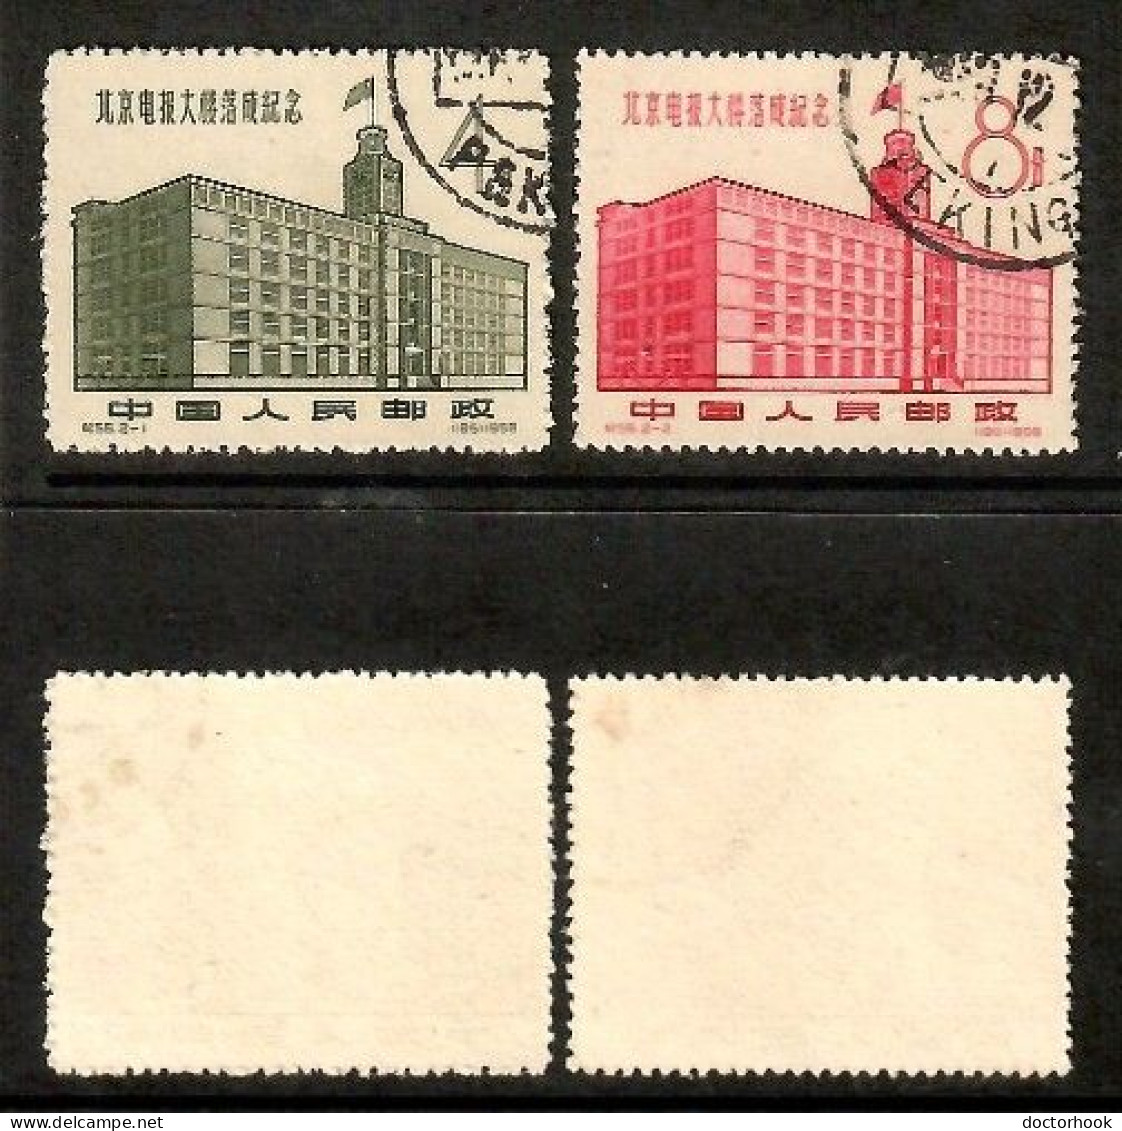 PEOPLES REPUBLIC Of CHINA   Scott # 372-3 USED (CONDITION AS PER SCAN) (Stamp Scan # 1006-8) - Used Stamps